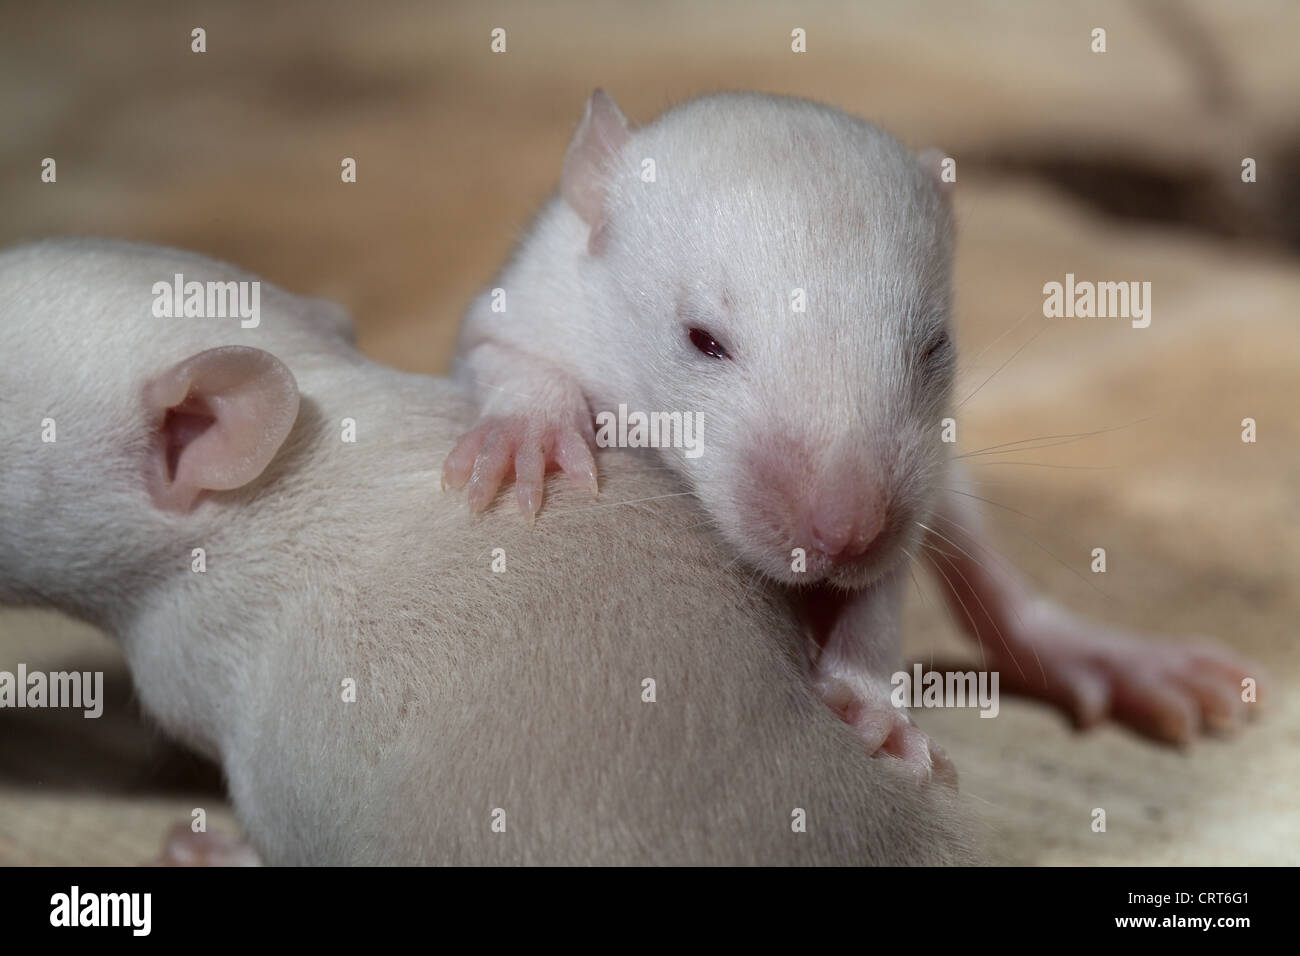 Domesticated Rats (Rattus norvegicus). 13 days old baby, 'pup' rats. Albino, showing pink eyes beginning to open for first time. Stock Photo